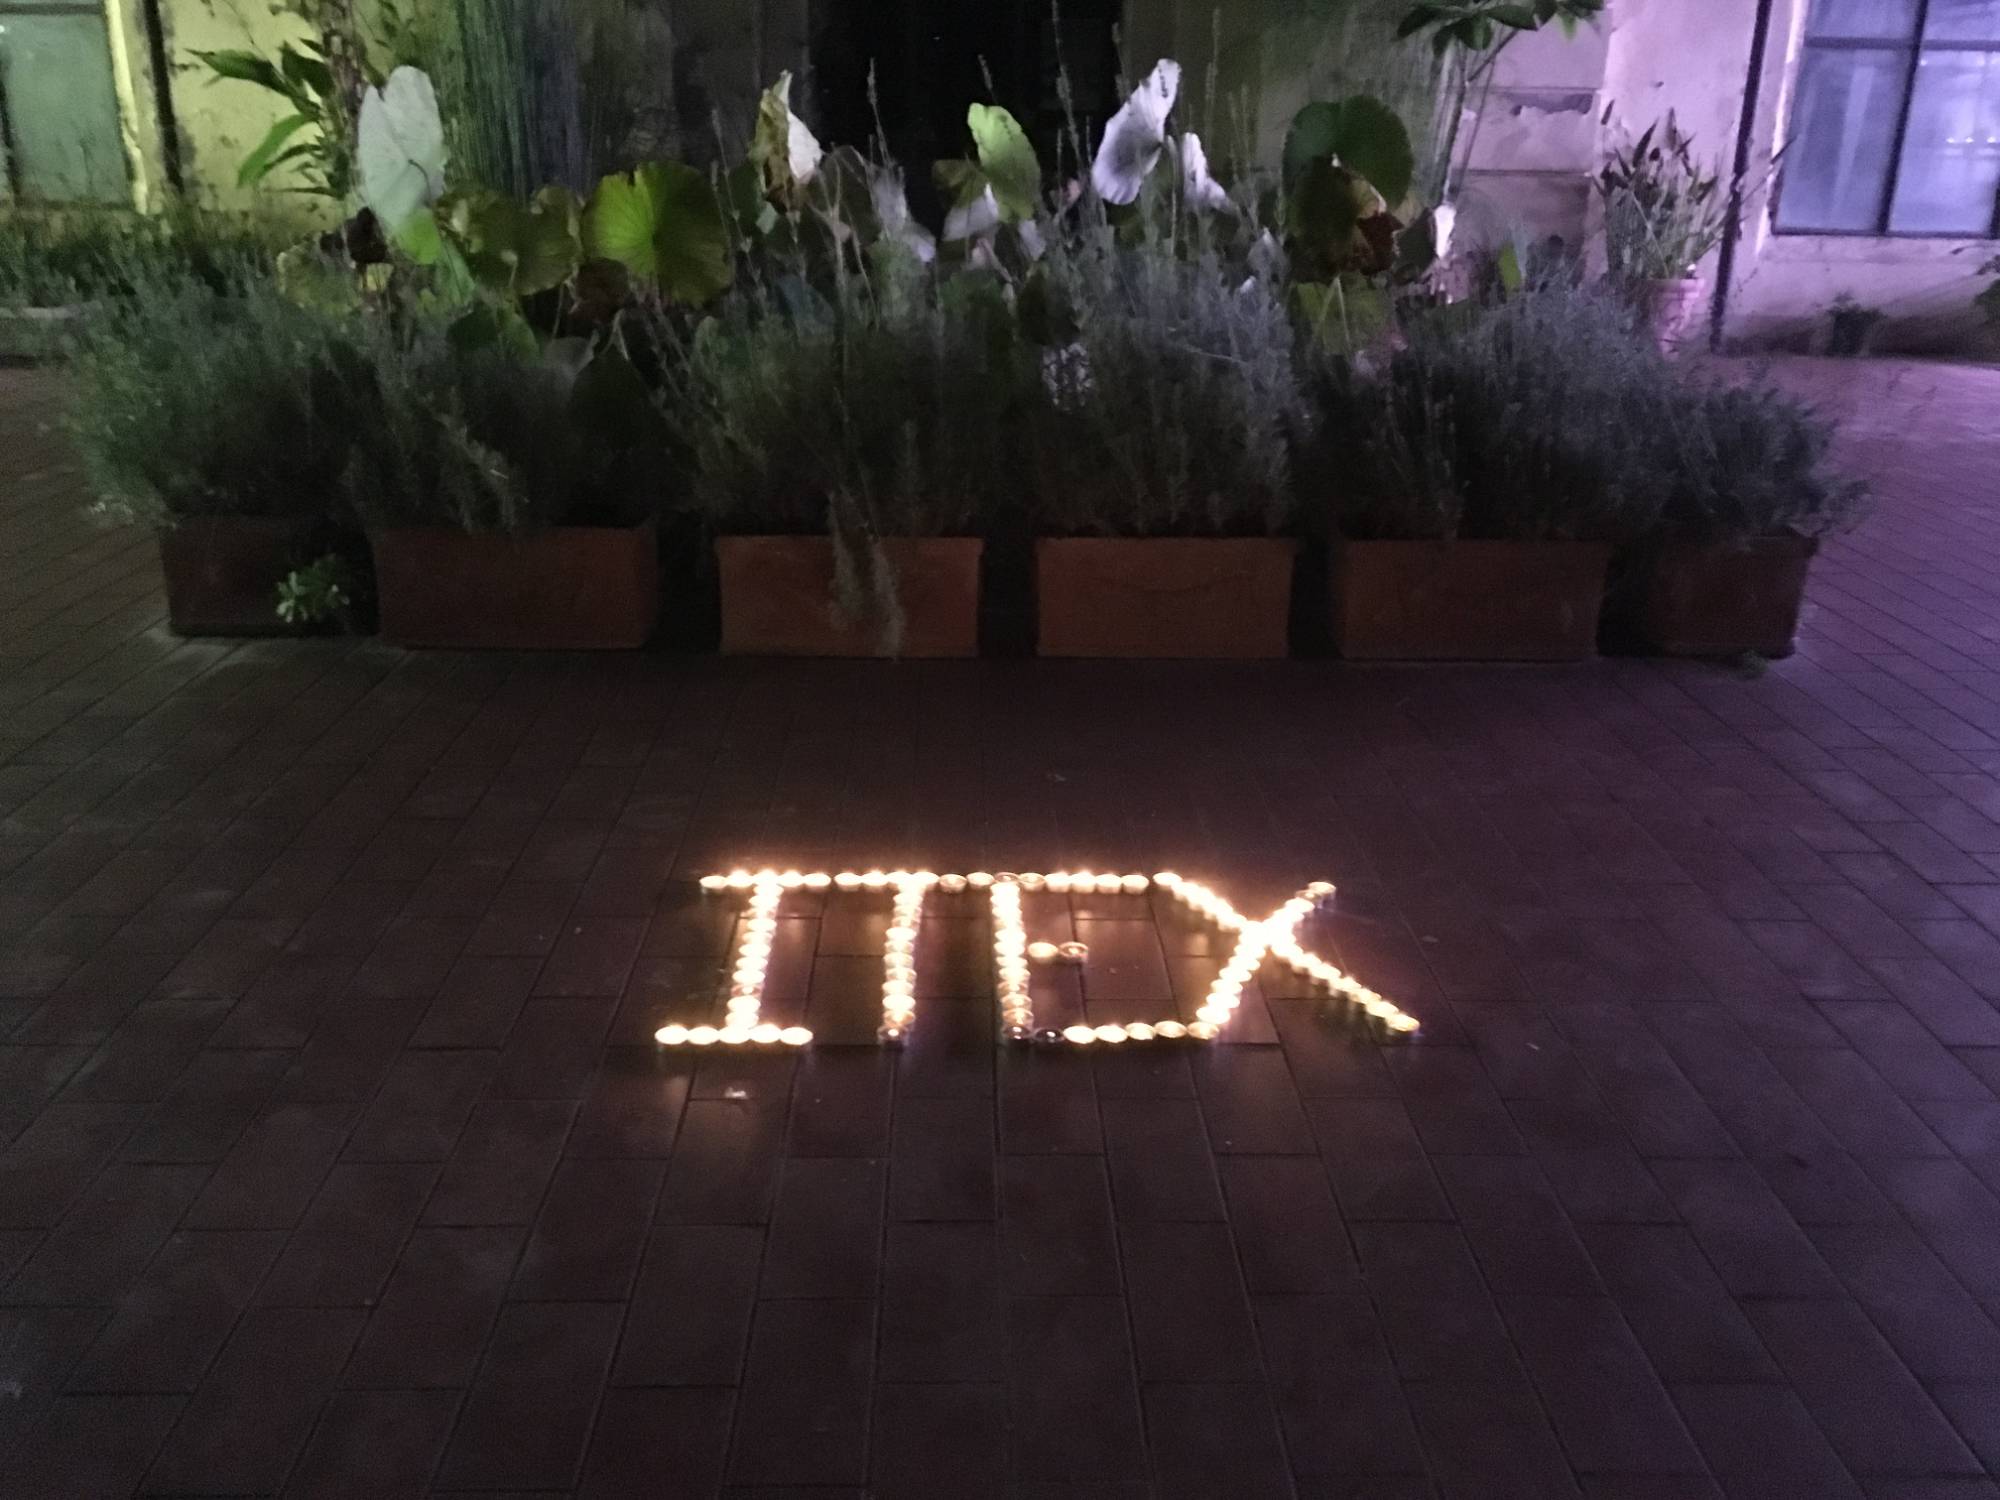 ITEX candles